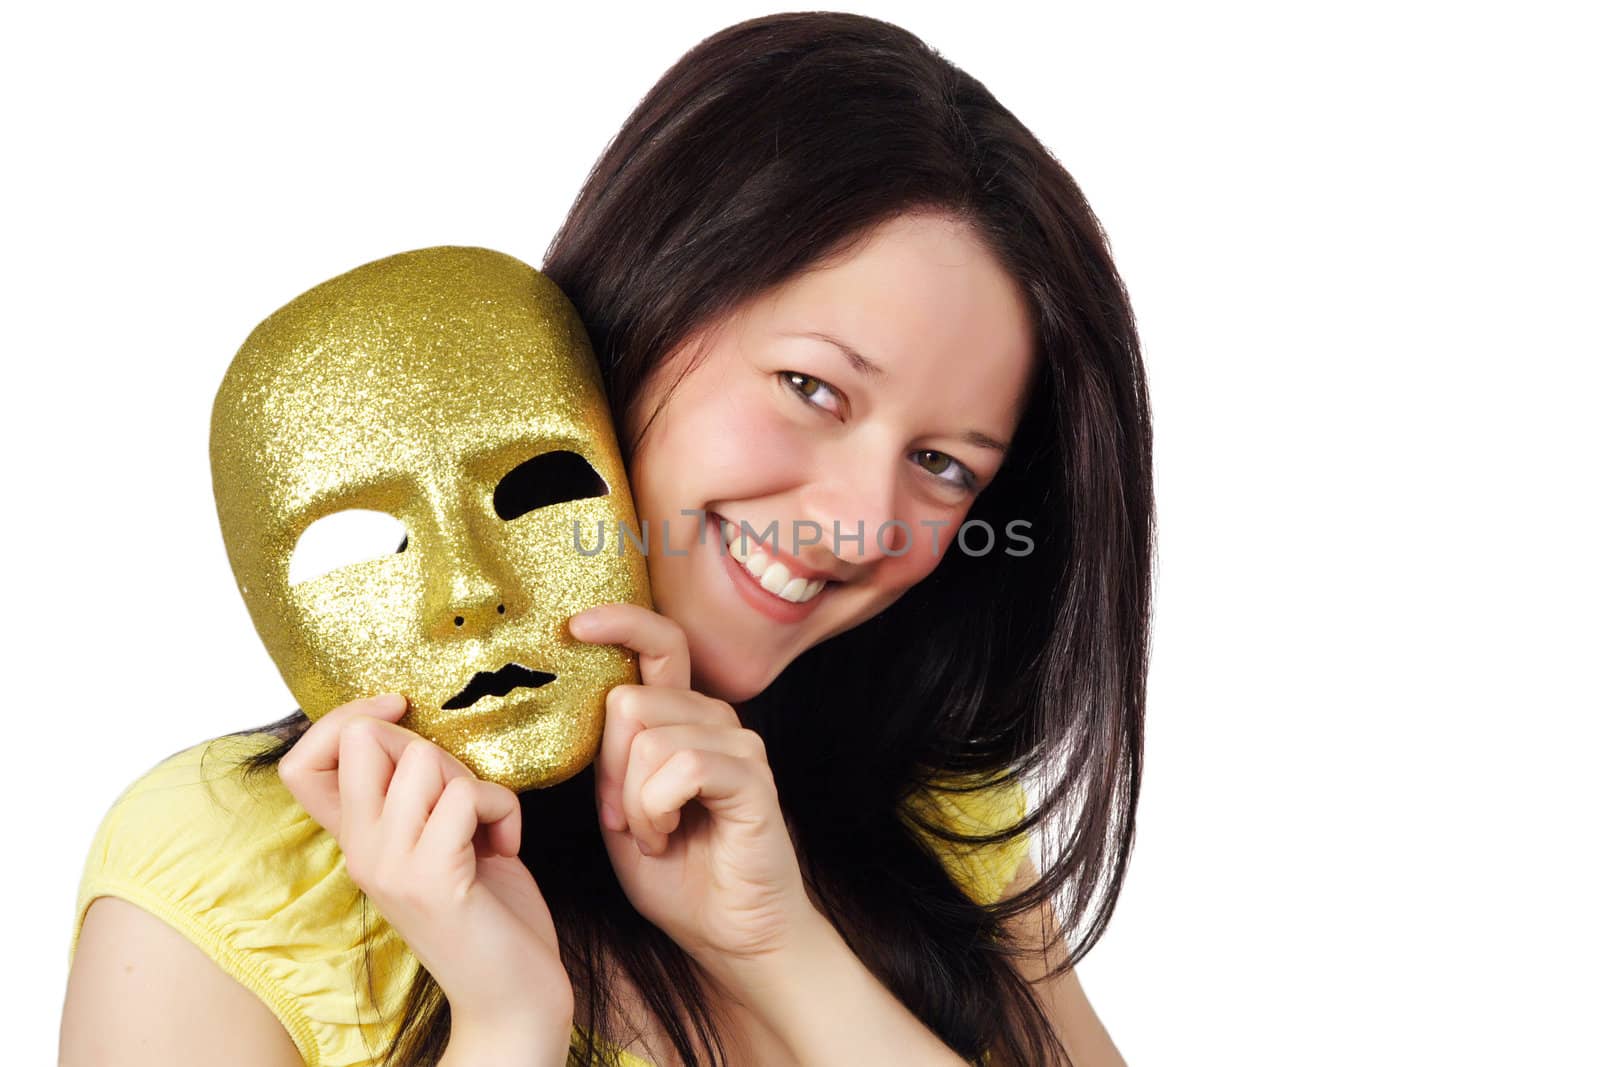 nice girl holding a gold mask, isolated on white